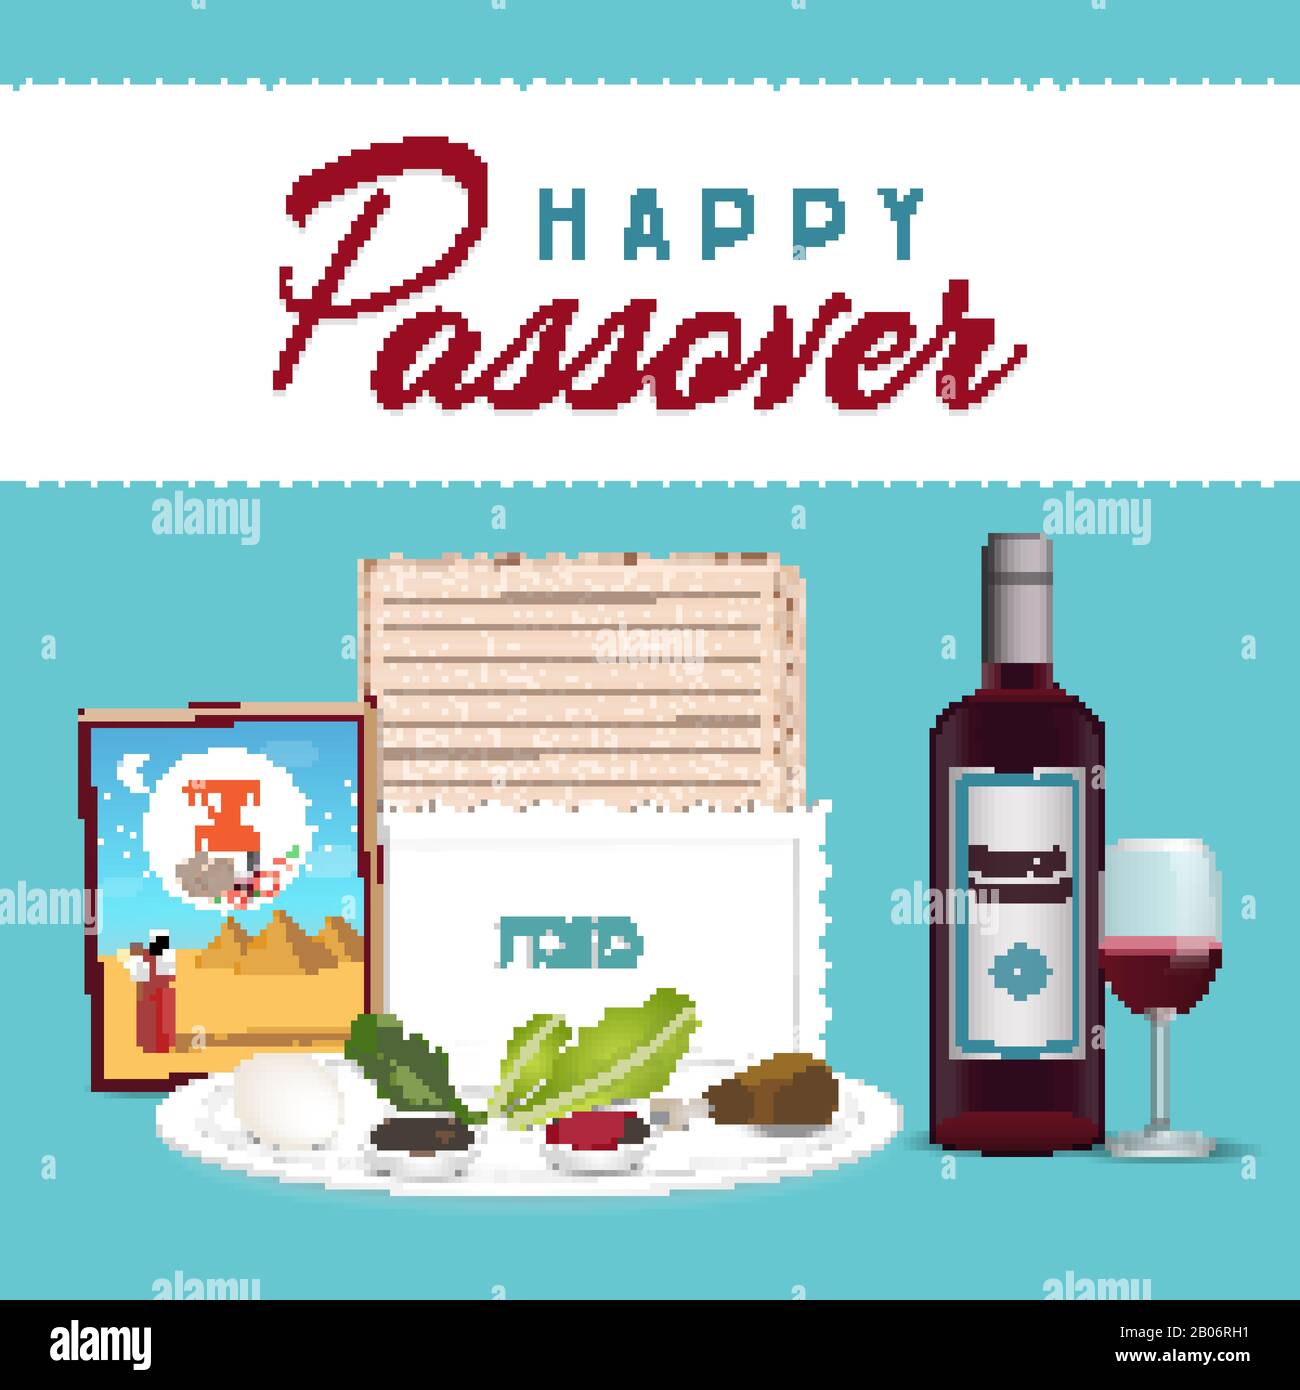 Happy Passover in hebrew Jewish holiday banner tamplate with wine, seder plate, matzo Stock Vector